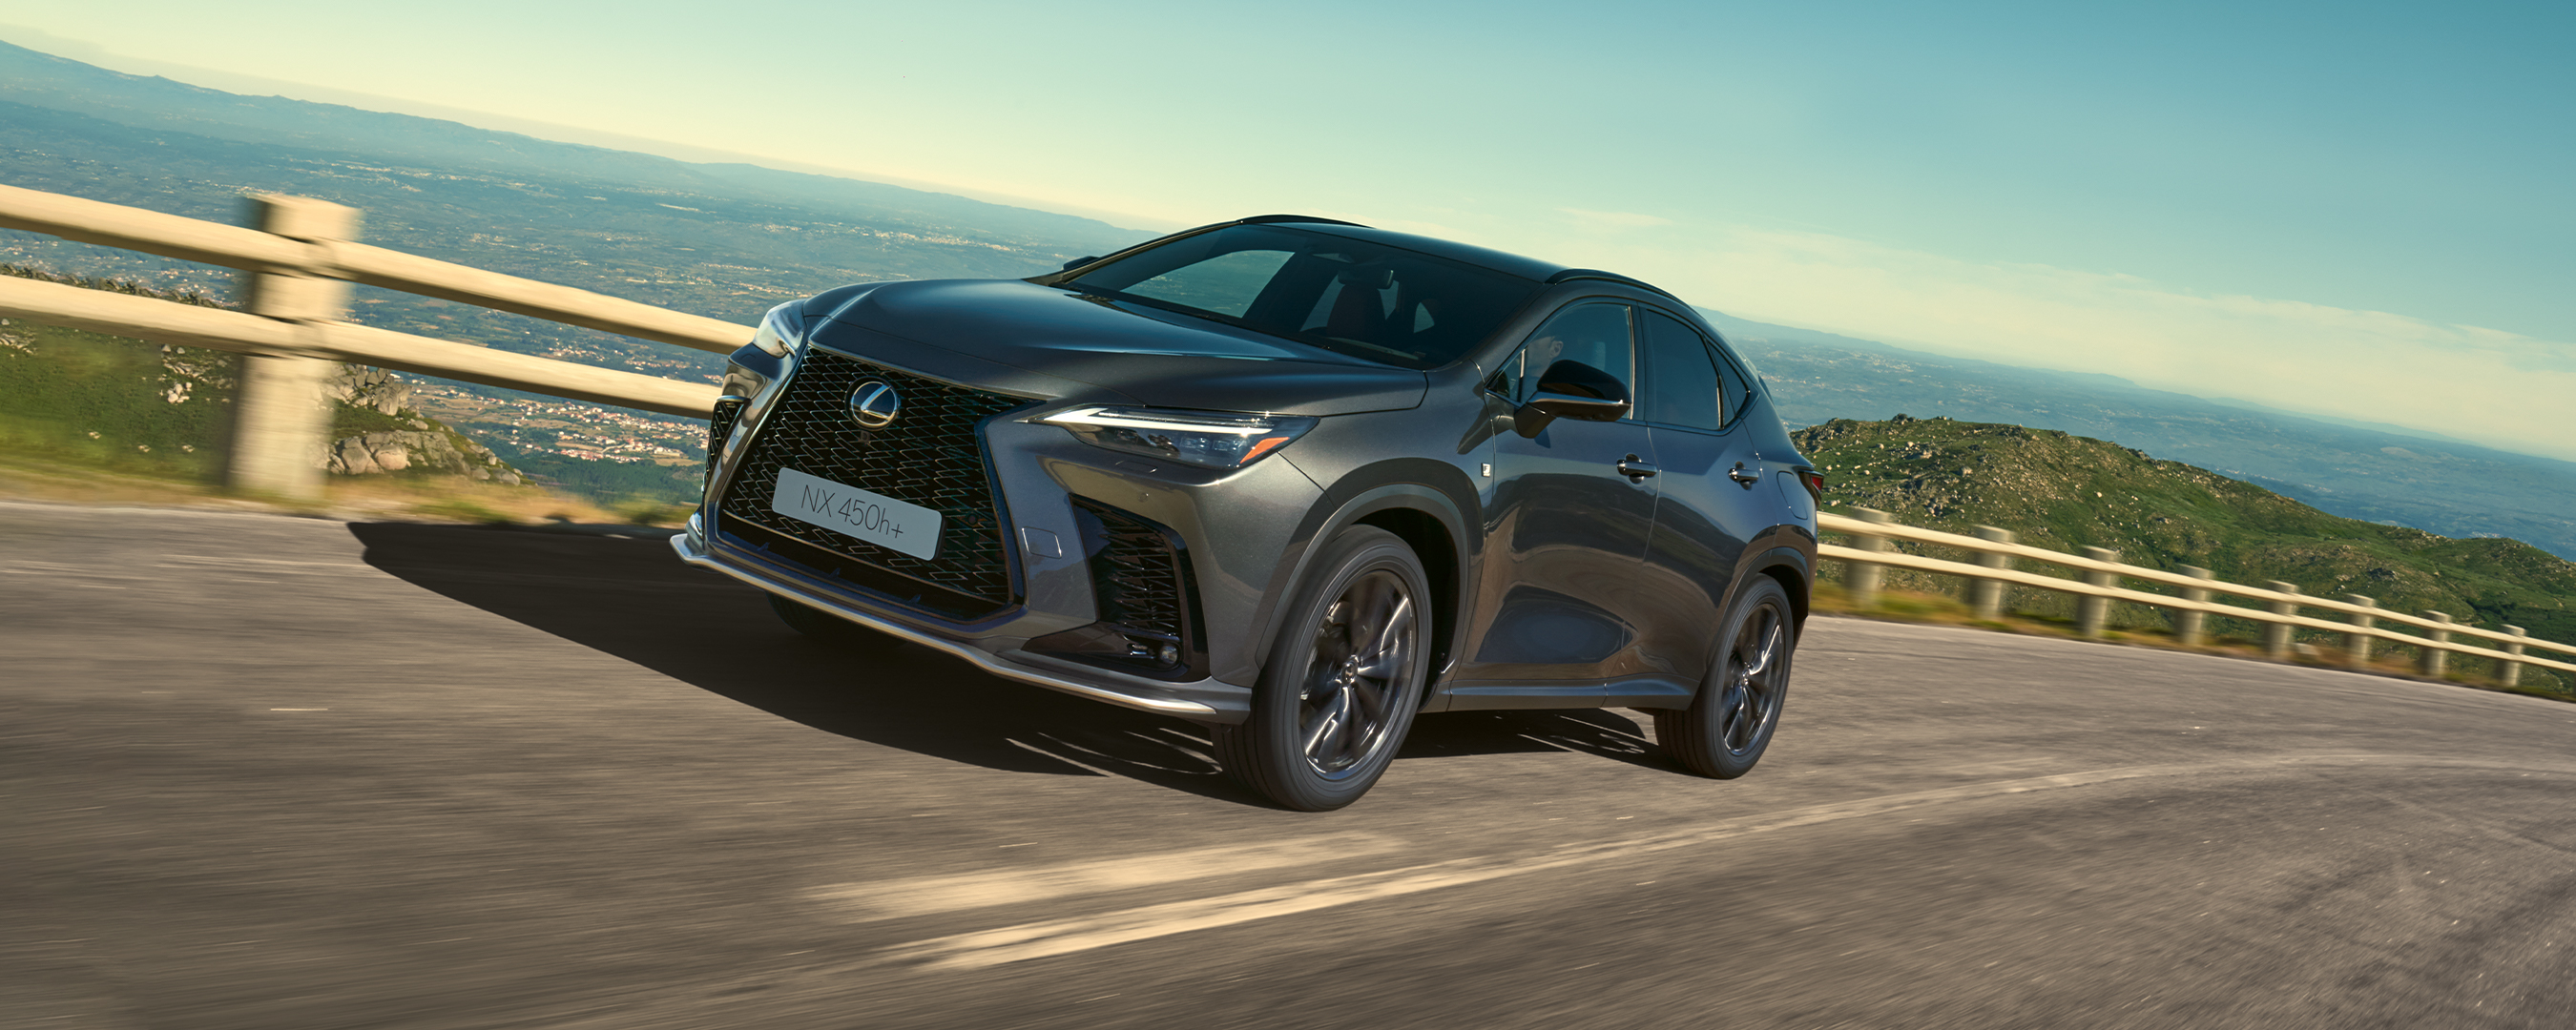 Do not sleep on the Lexus RX as your next luxury SUV and schedule a test drive today near Lexington, Kentucky.